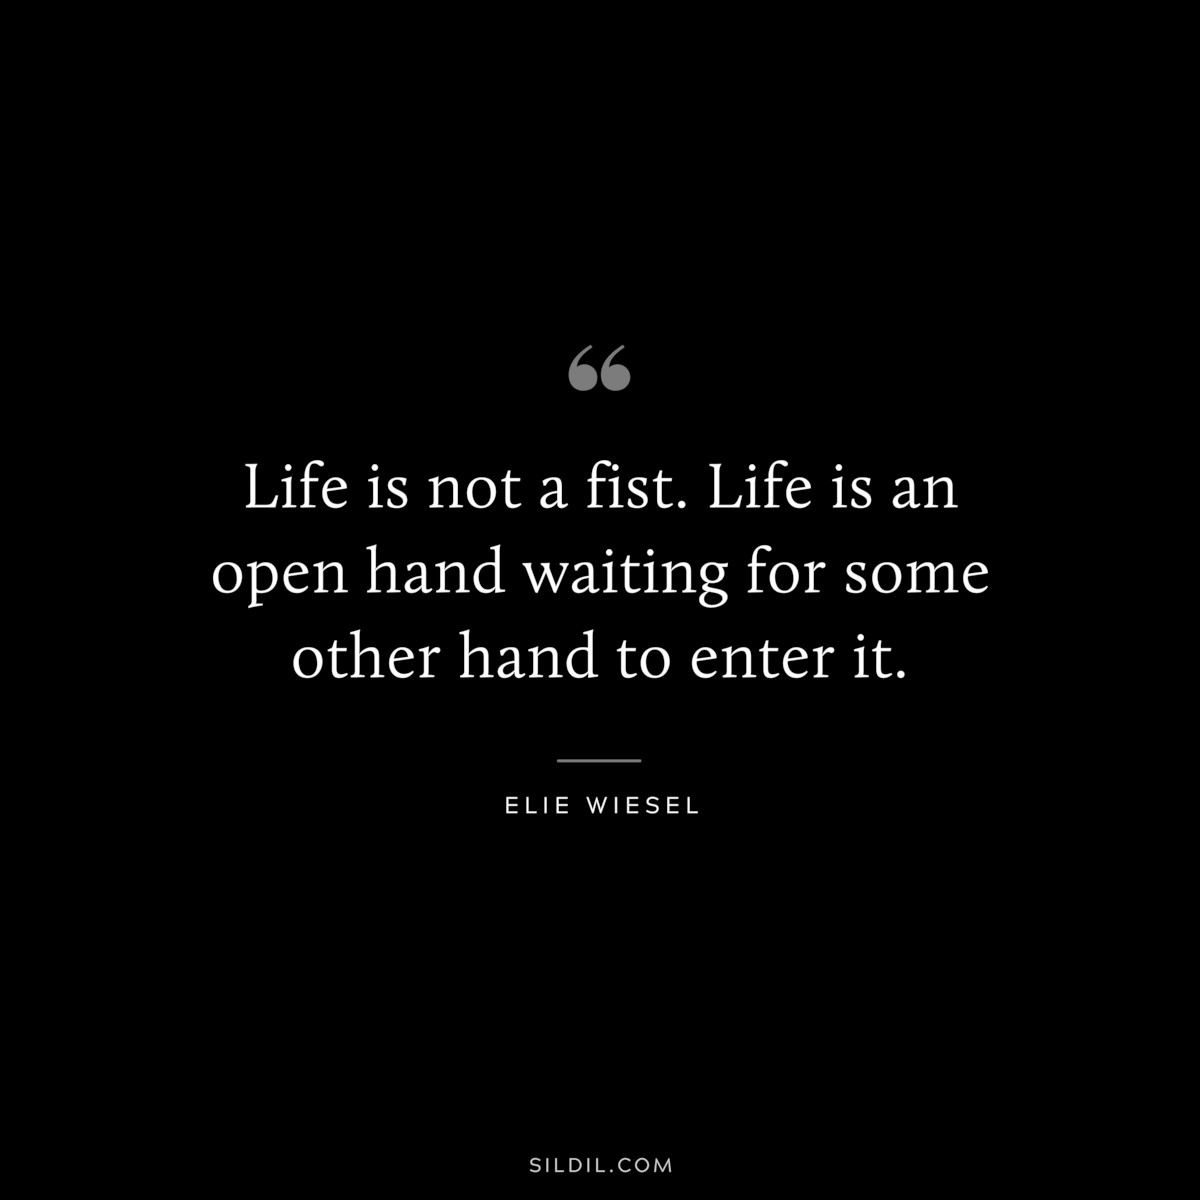 Life is not a fist. Life is an open hand waiting for some other hand to enter it. ― Elie Wiesel